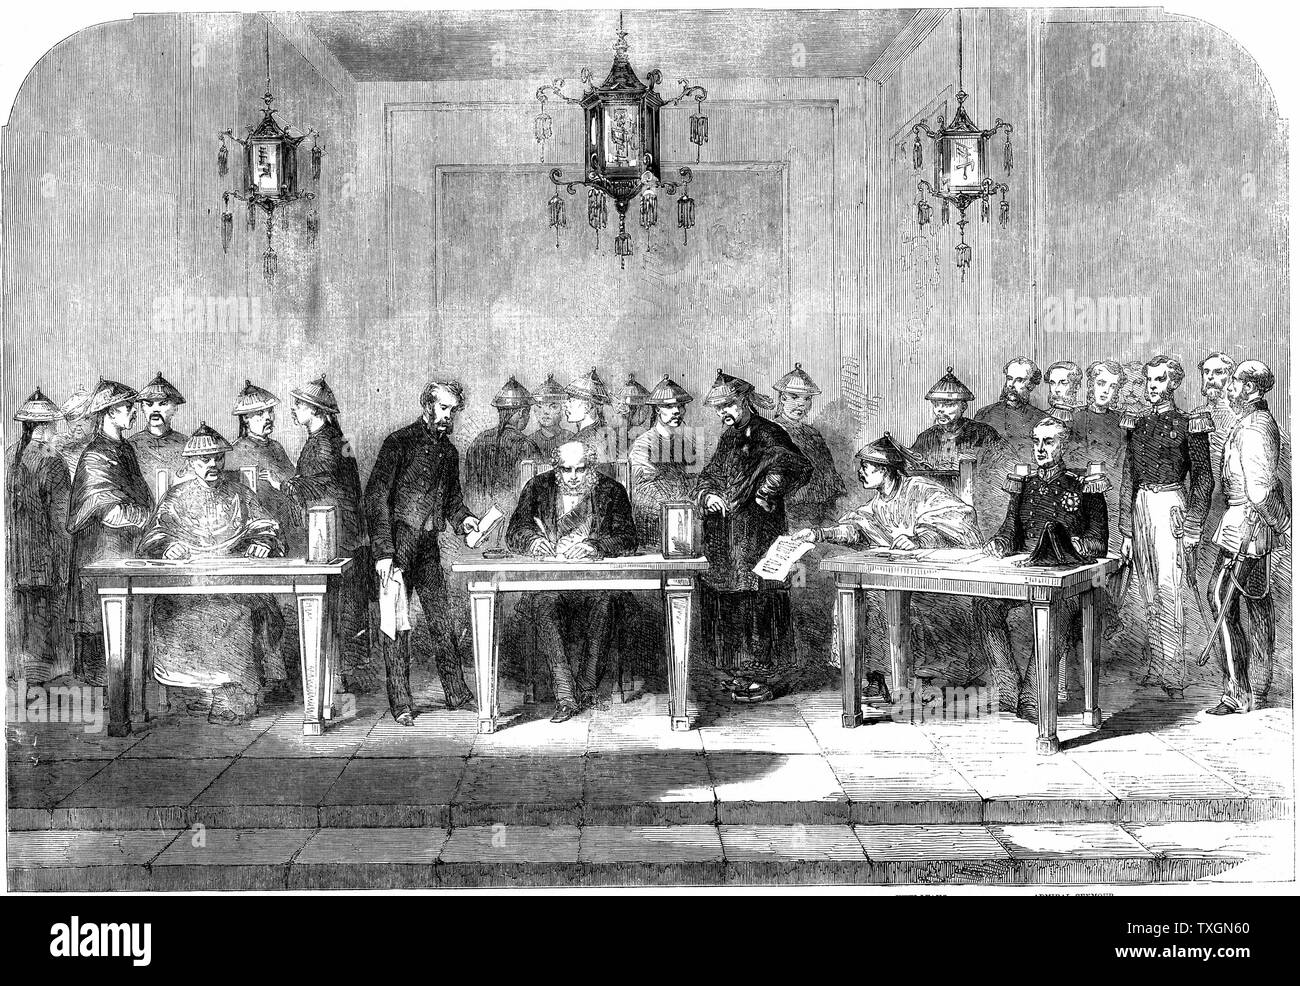 Second Opium War. Lord Elgin (1811-63), left, signing the Treaty of Tainjin which brought to a formal end the Second Opium War between Britain and China, 16 June 1858.  Tainjin: modern Tientsin. Contemporary woodcut. Stock Photo